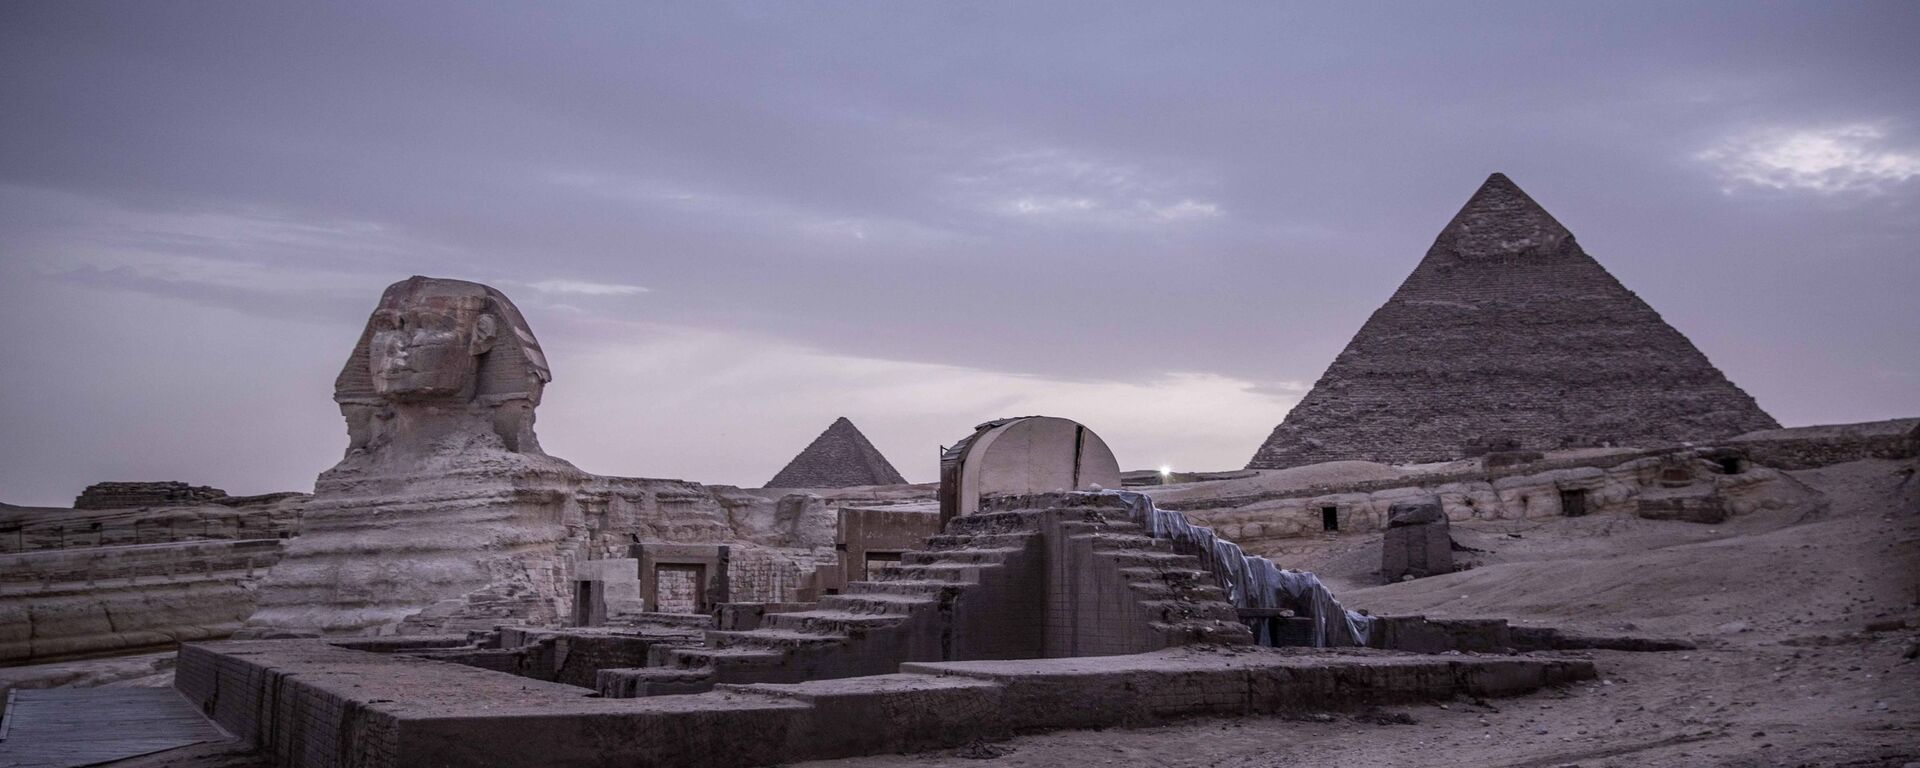 This March 30, 2020 file photo, shows the empty Giza Pyramids and Sphinx complex on lockdown due to the coronavirus outbreak in Egypt. In July, fearing further economic fallout, the government reopened much of society and welcomed hundreds of international tourists back to resorts, even as daily reported deaths exceeded 80. Restaurants and cafes are reopening with some continued restrictions, and masks have been mandated in public - Sputnik International, 1920, 28.02.2021